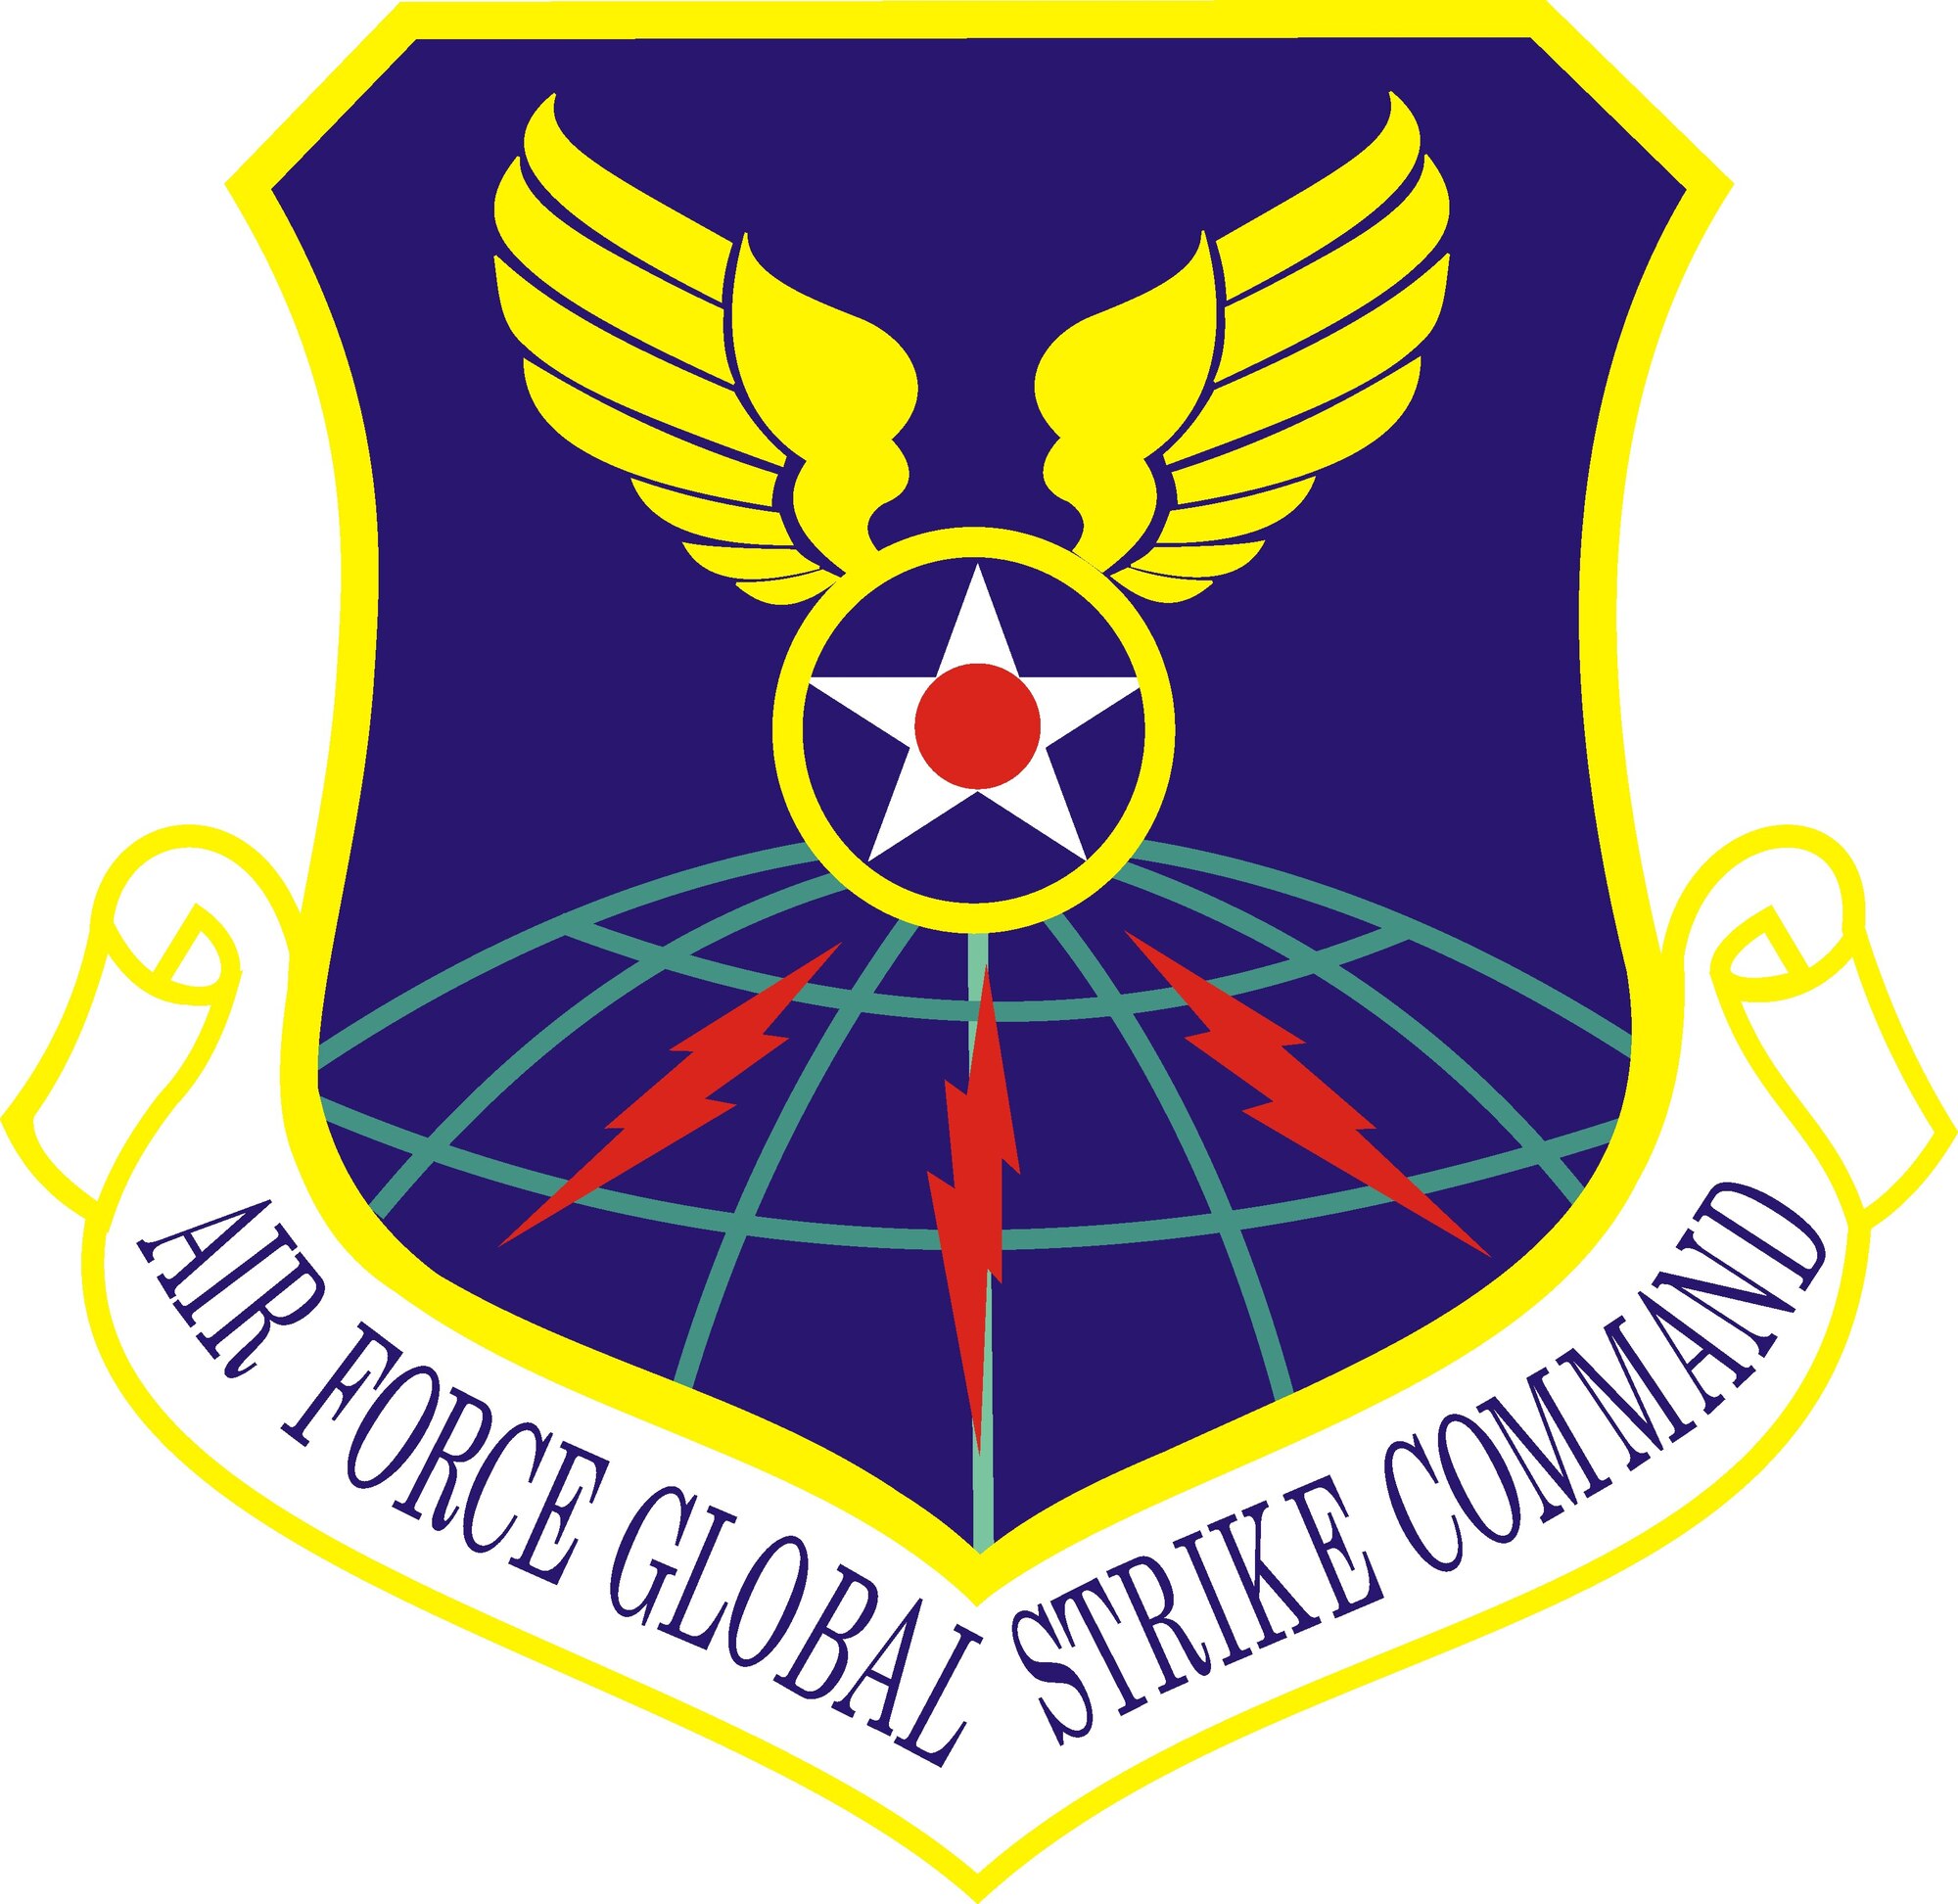 The significance of the Air Force Global Strike Command patch is: Ultramarine blue and Air Force yellow are the Air Force colors.  Blue alludes to the sky, the primary theater of Air Force operations.  Yellow refers to the sun and the excellence required of Air Force personnel.  The globe reflects the command’s global capabilities. The wings represent the dominance in the air and reflect the lineage to the Army Air Corps.  The star represents clarity of purpose to maintain readiness and deter adversaries.  The circle in the middle of the star is significant of the past and present Airmen who have made individual sacrifices to achieve mission goals.  The lightning flashes, symbolic of speed and power, represent the warfighting mission, should deterrence fail, and are reminiscent of the lineage to Strategic Air Command. 